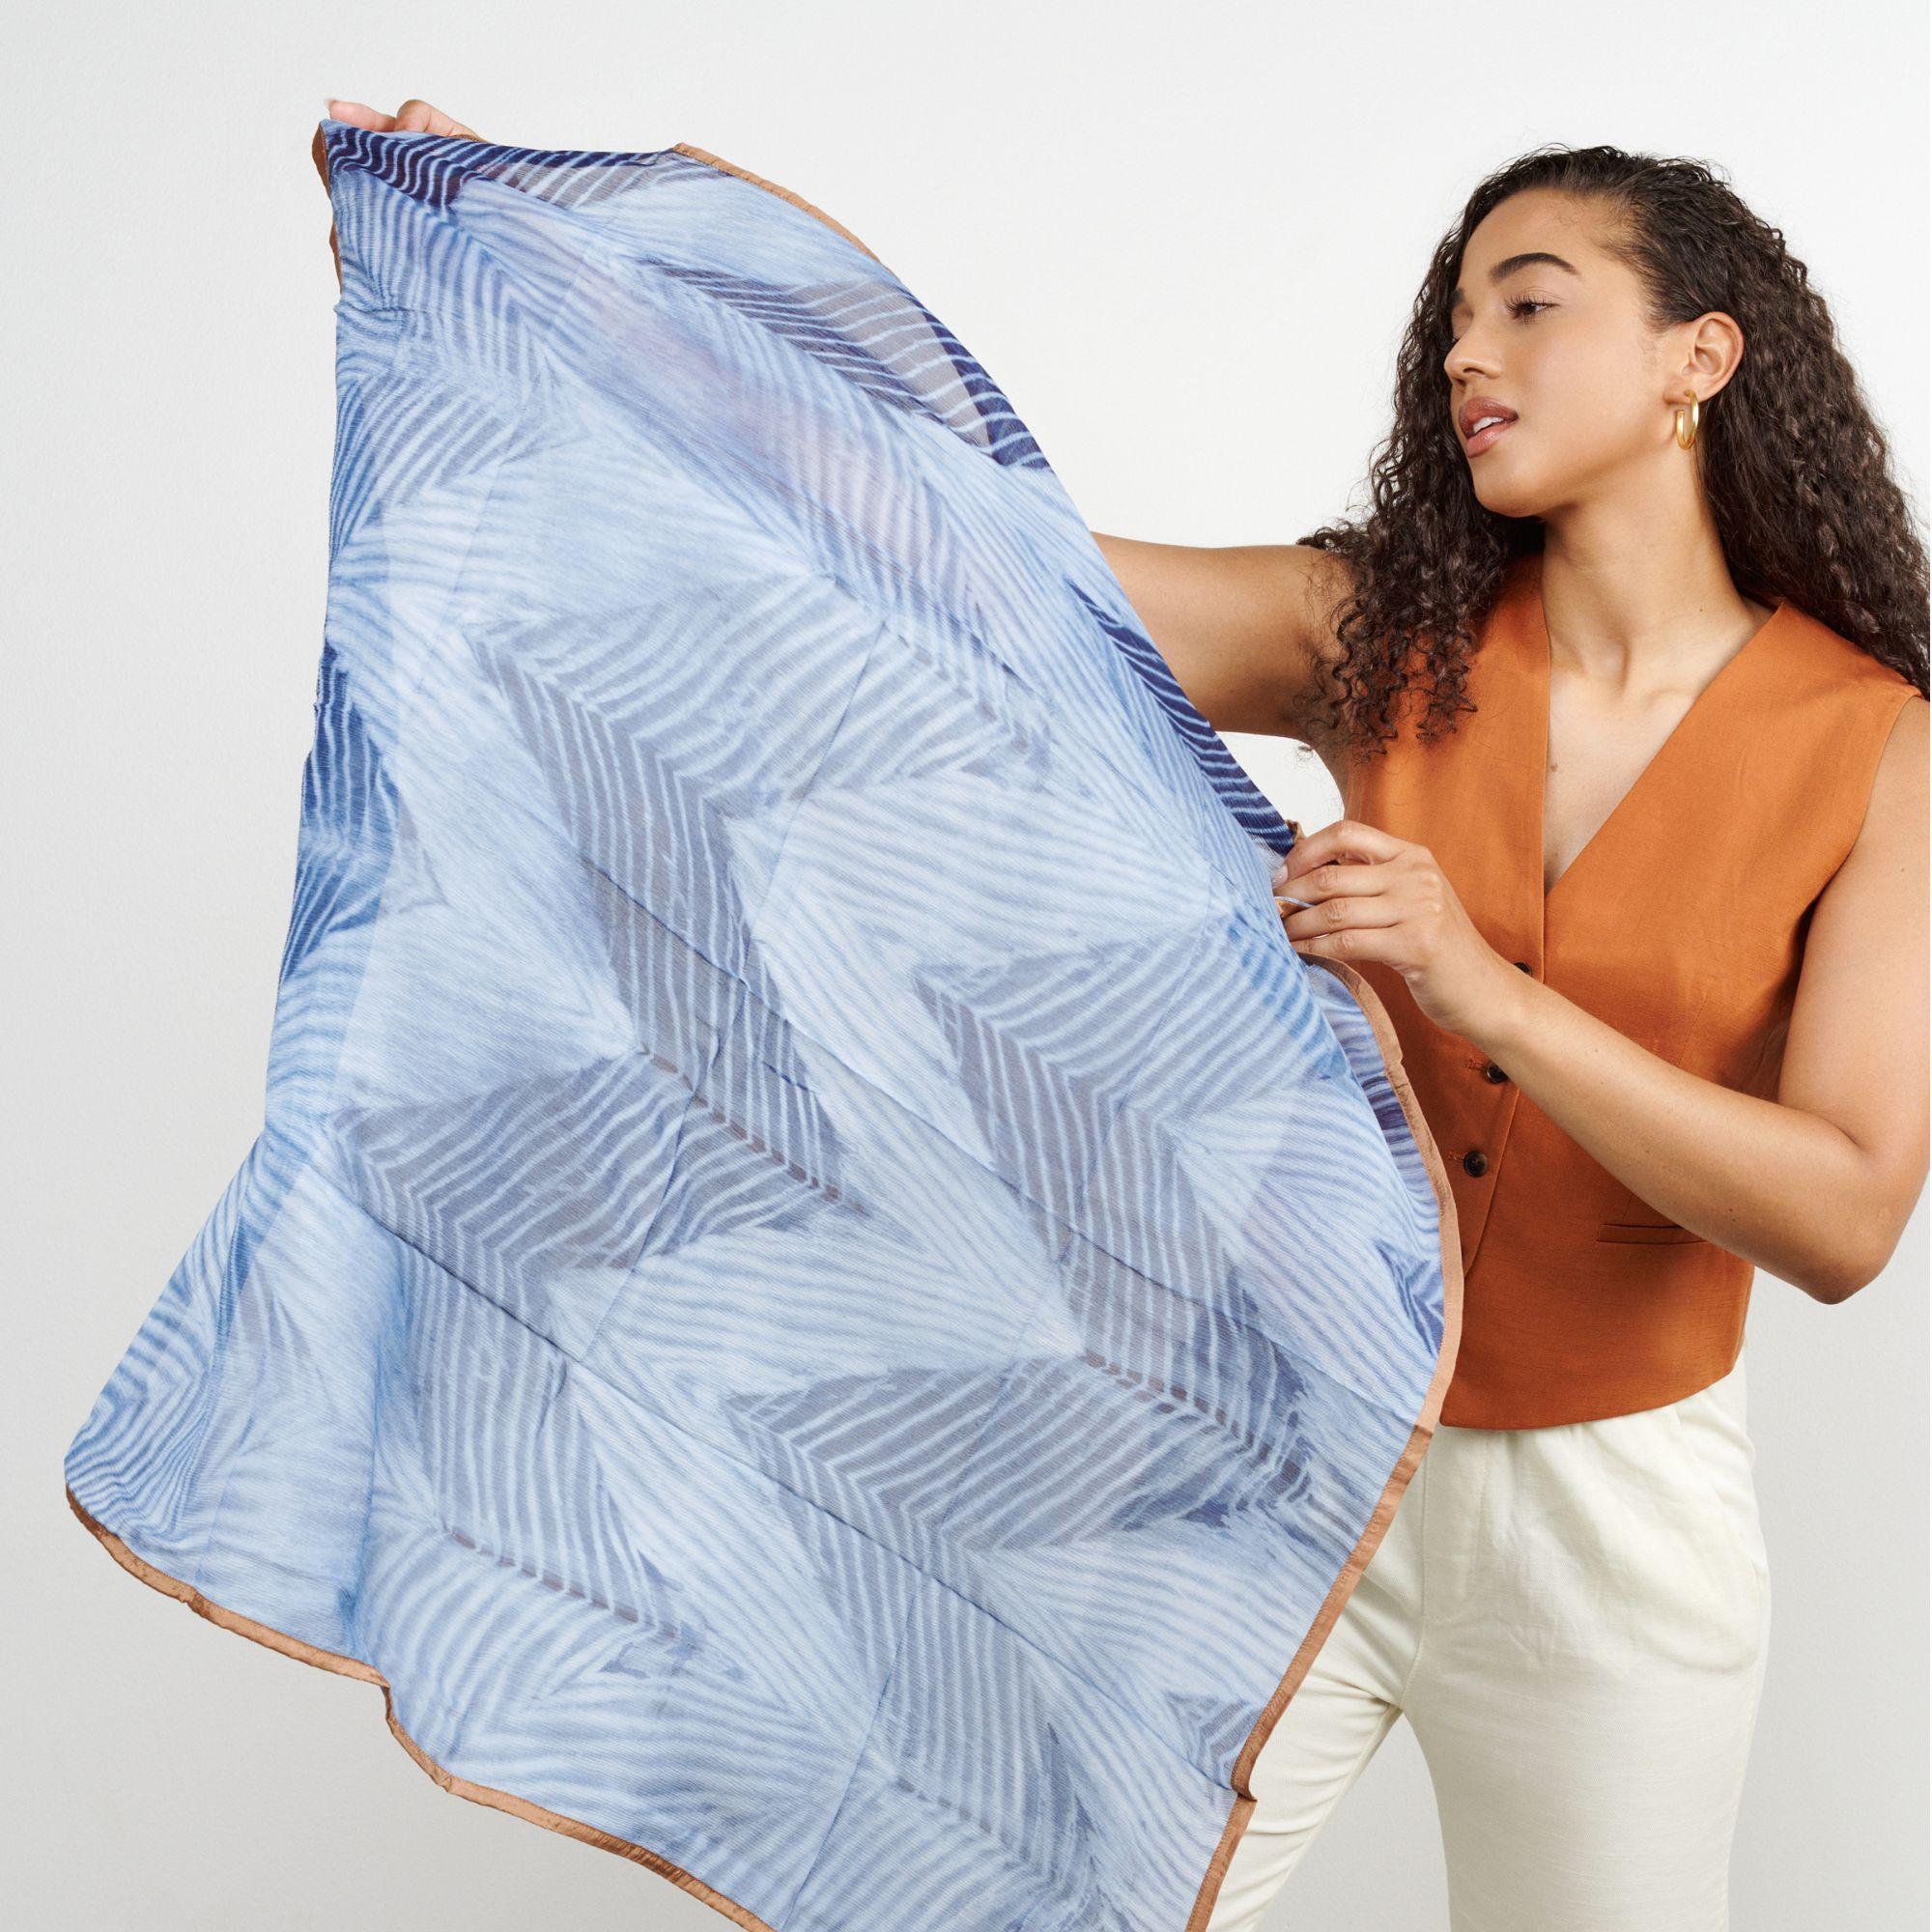 ​Add a tinge of serenity with our beautiful Samu Indigo Scarf which is apure statement piece that adds modern and timeless quality as an accessory which can be used suitably for personal / workwear, as a travel accessory or a thoughtful gift. Hem of